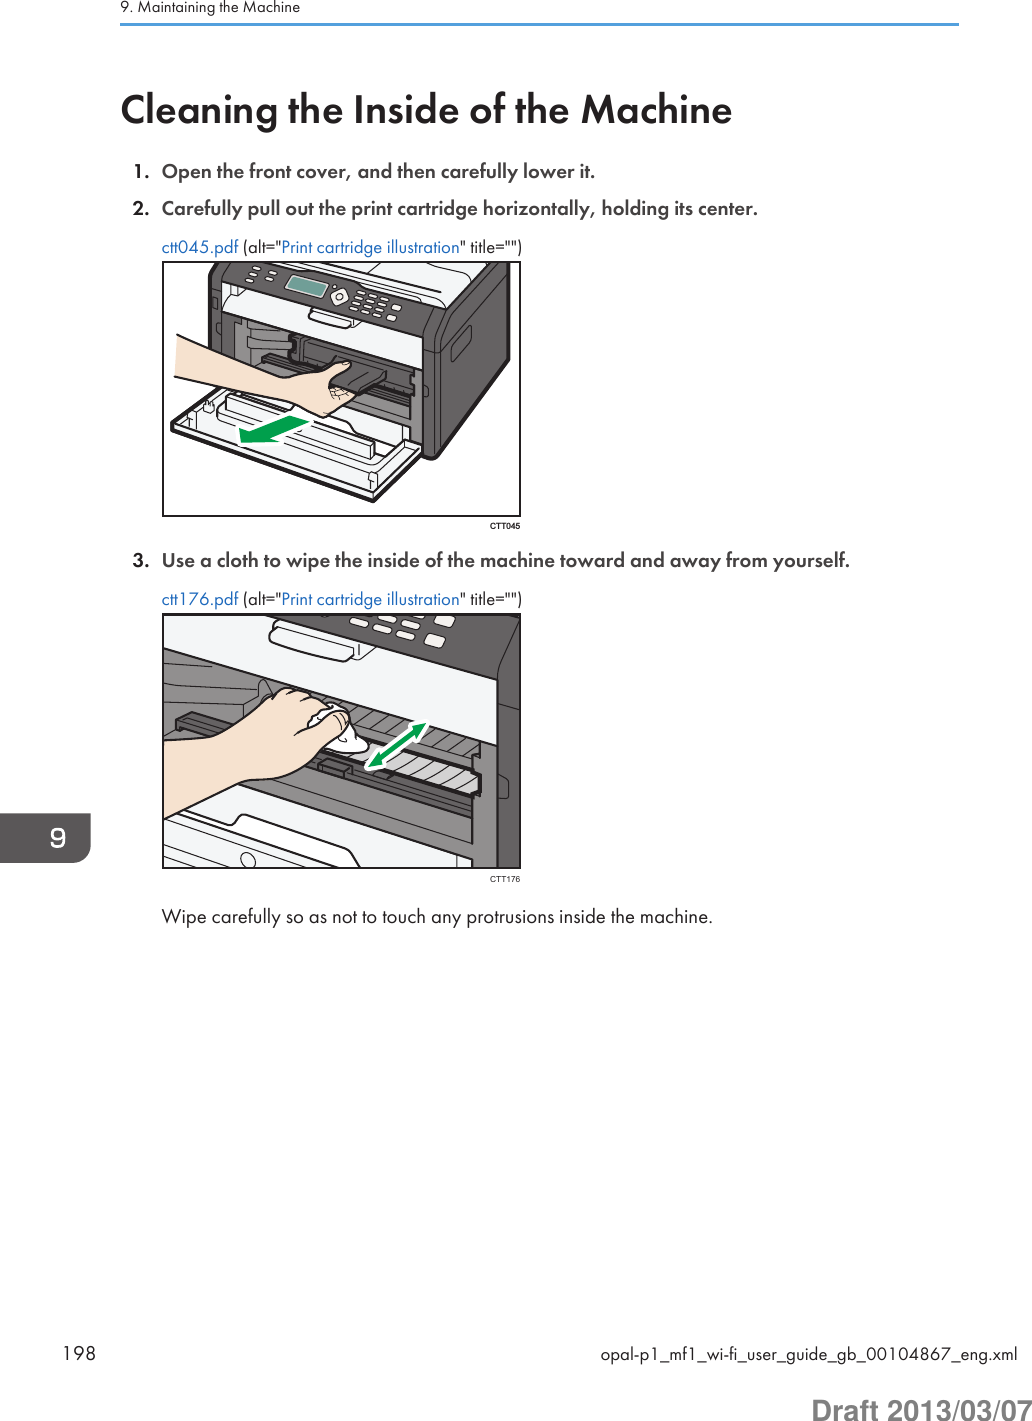 Cleaning the Inside of the Machine1. Open the front cover, and then carefully lower it.2. Carefully pull out the print cartridge horizontally, holding its center.ctt045.pdf (alt=&quot;Print cartridge illustration&quot; title=&quot;&quot;)CTT0453. Use a cloth to wipe the inside of the machine toward and away from yourself.ctt176.pdf (alt=&quot;Print cartridge illustration&quot; title=&quot;&quot;)CTT176Wipe carefully so as not to touch any protrusions inside the machine.9. Maintaining the Machine198 opal-p1_mf1_wi-fi_user_guide_gb_00104867_eng.xmlDraft 2013/03/07